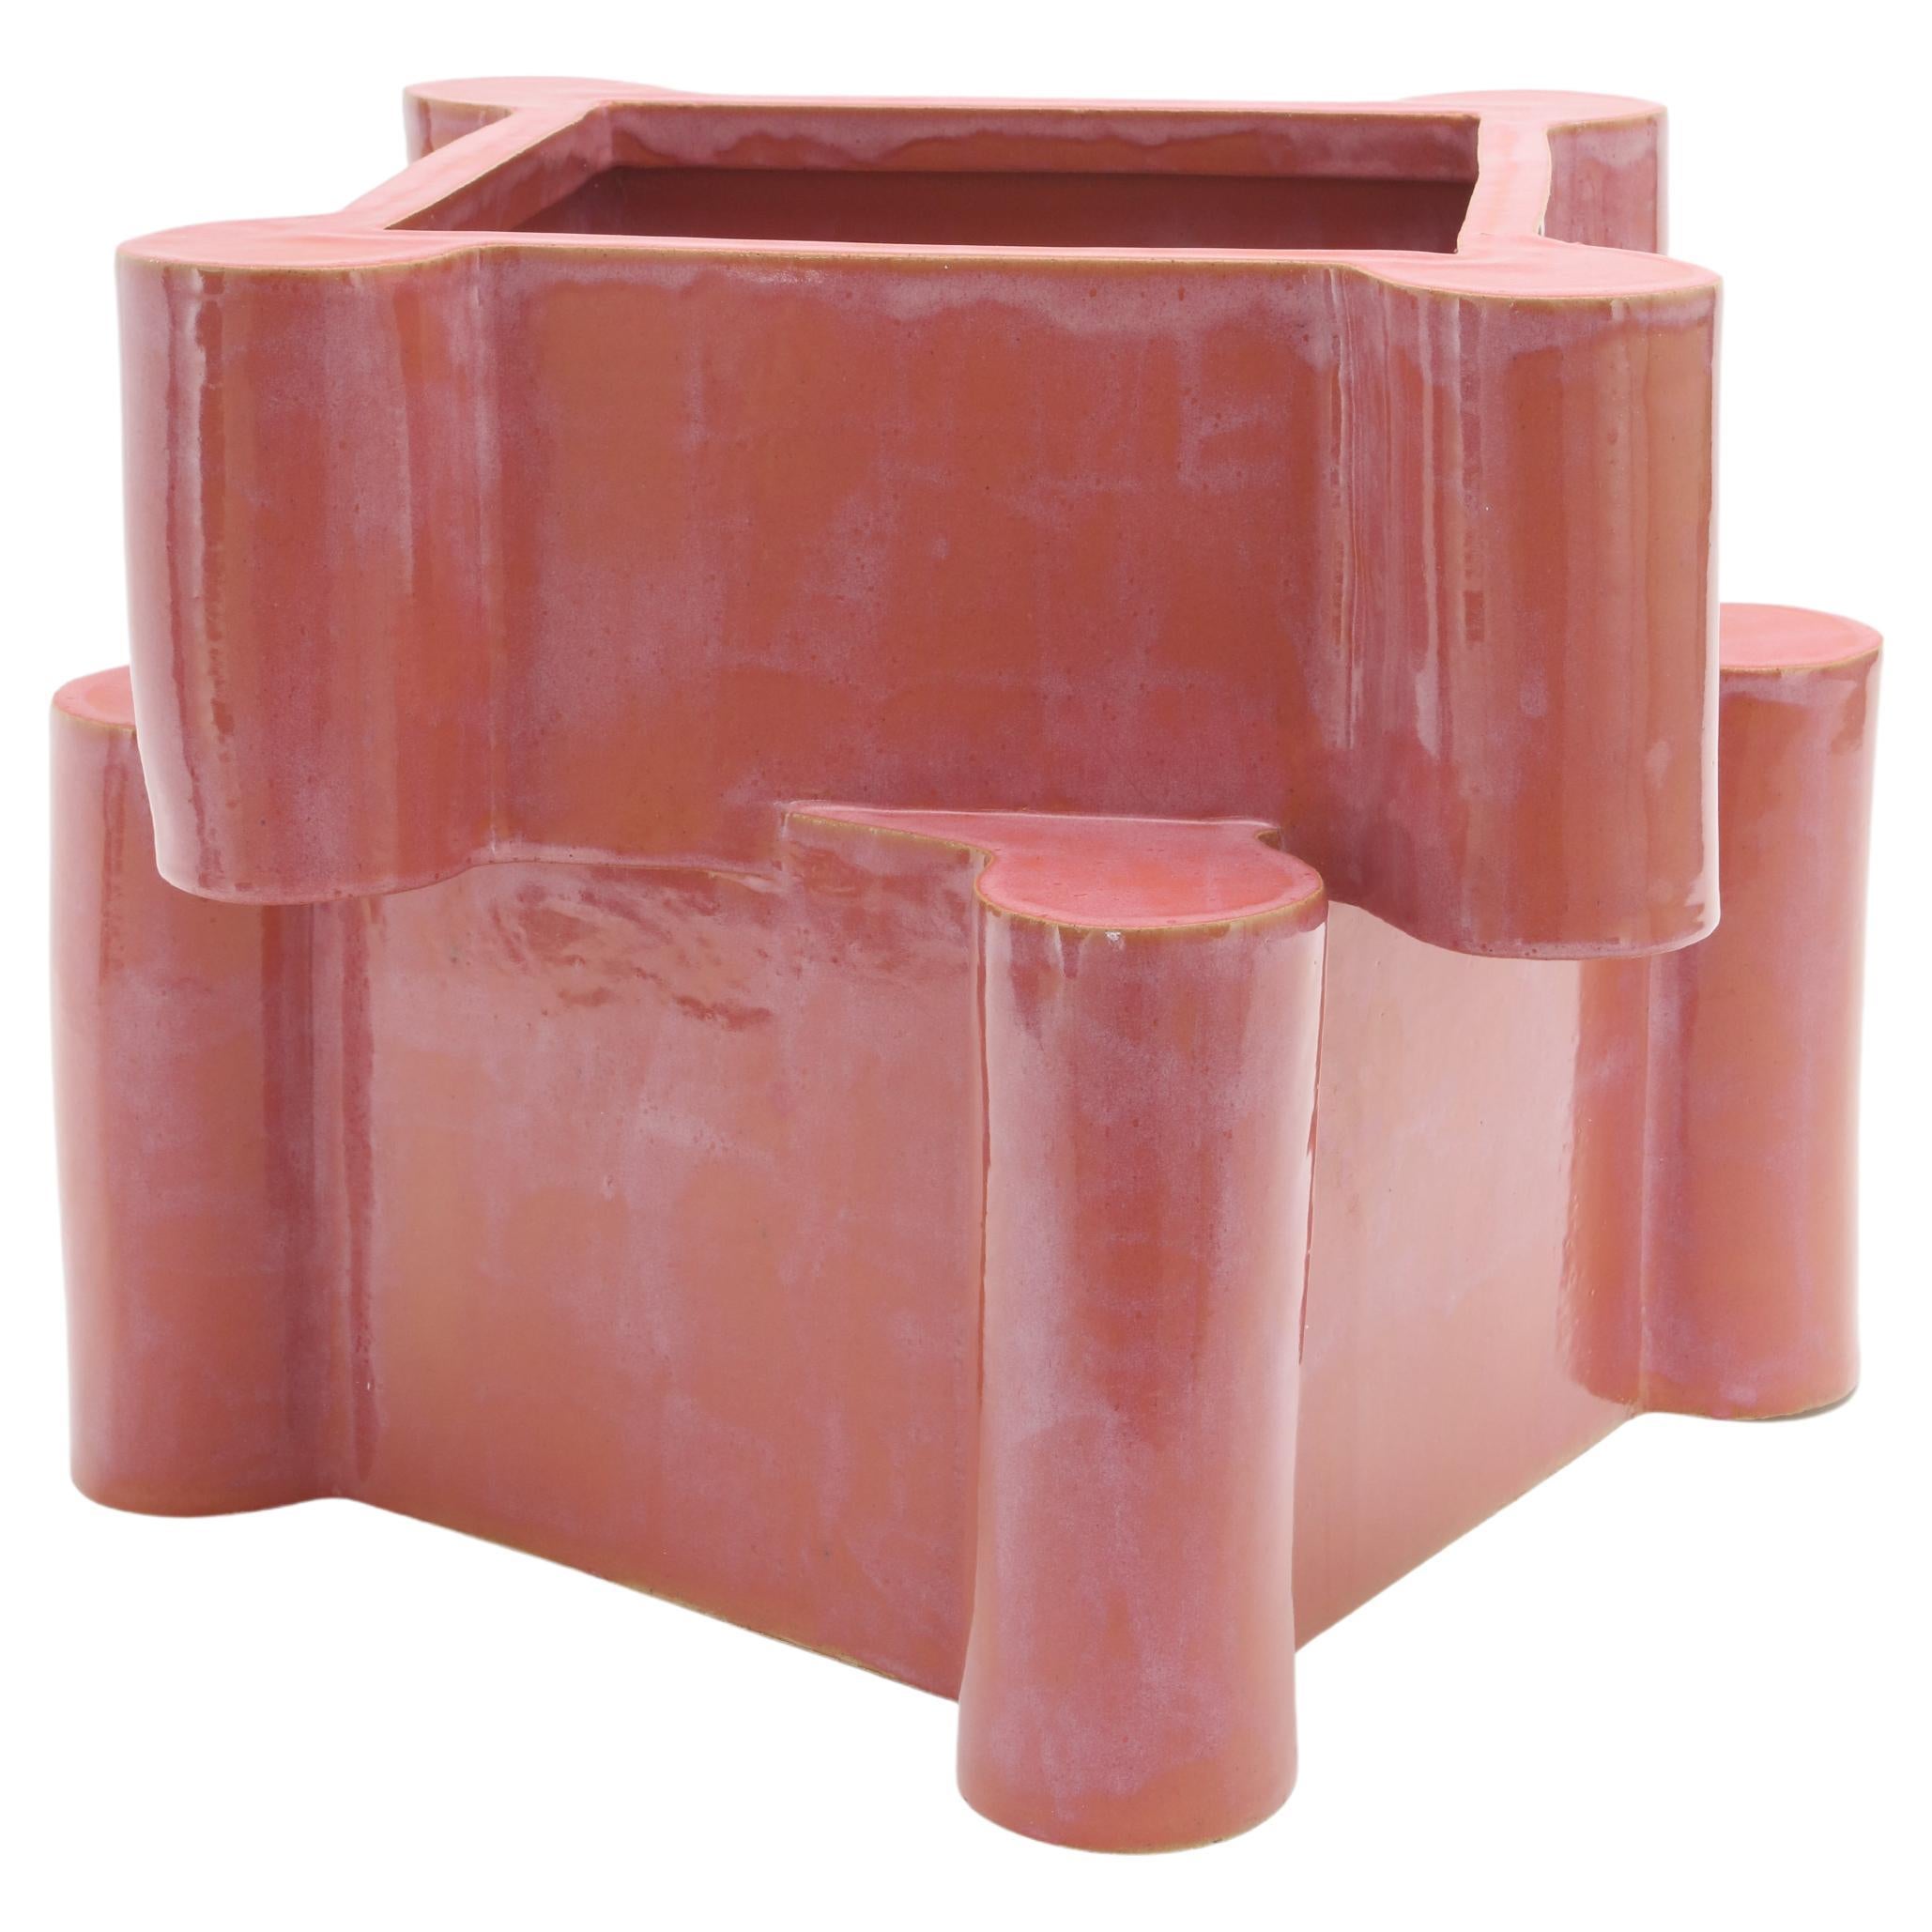 Twisted Castle Ceramic Planter in Sunset Pink by Bzippy